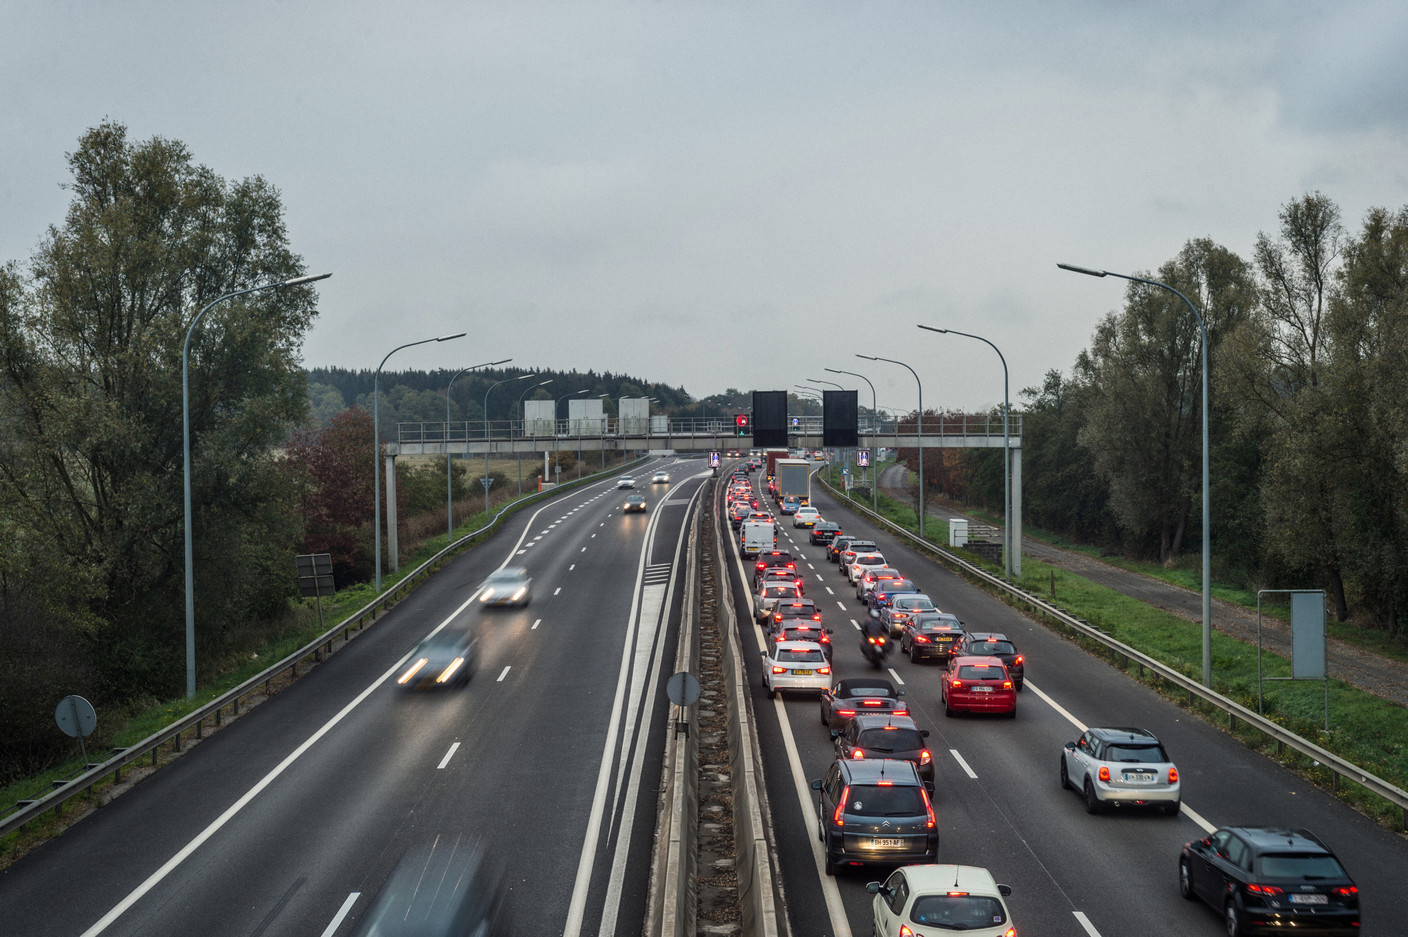 The new benefits calculation rate will apply as of 2023. In concrete terms, this rate will be 0.5% for cars with low electrical energy consumption, less than or equal to 18kWh/100km. Photo: Mike Zenari